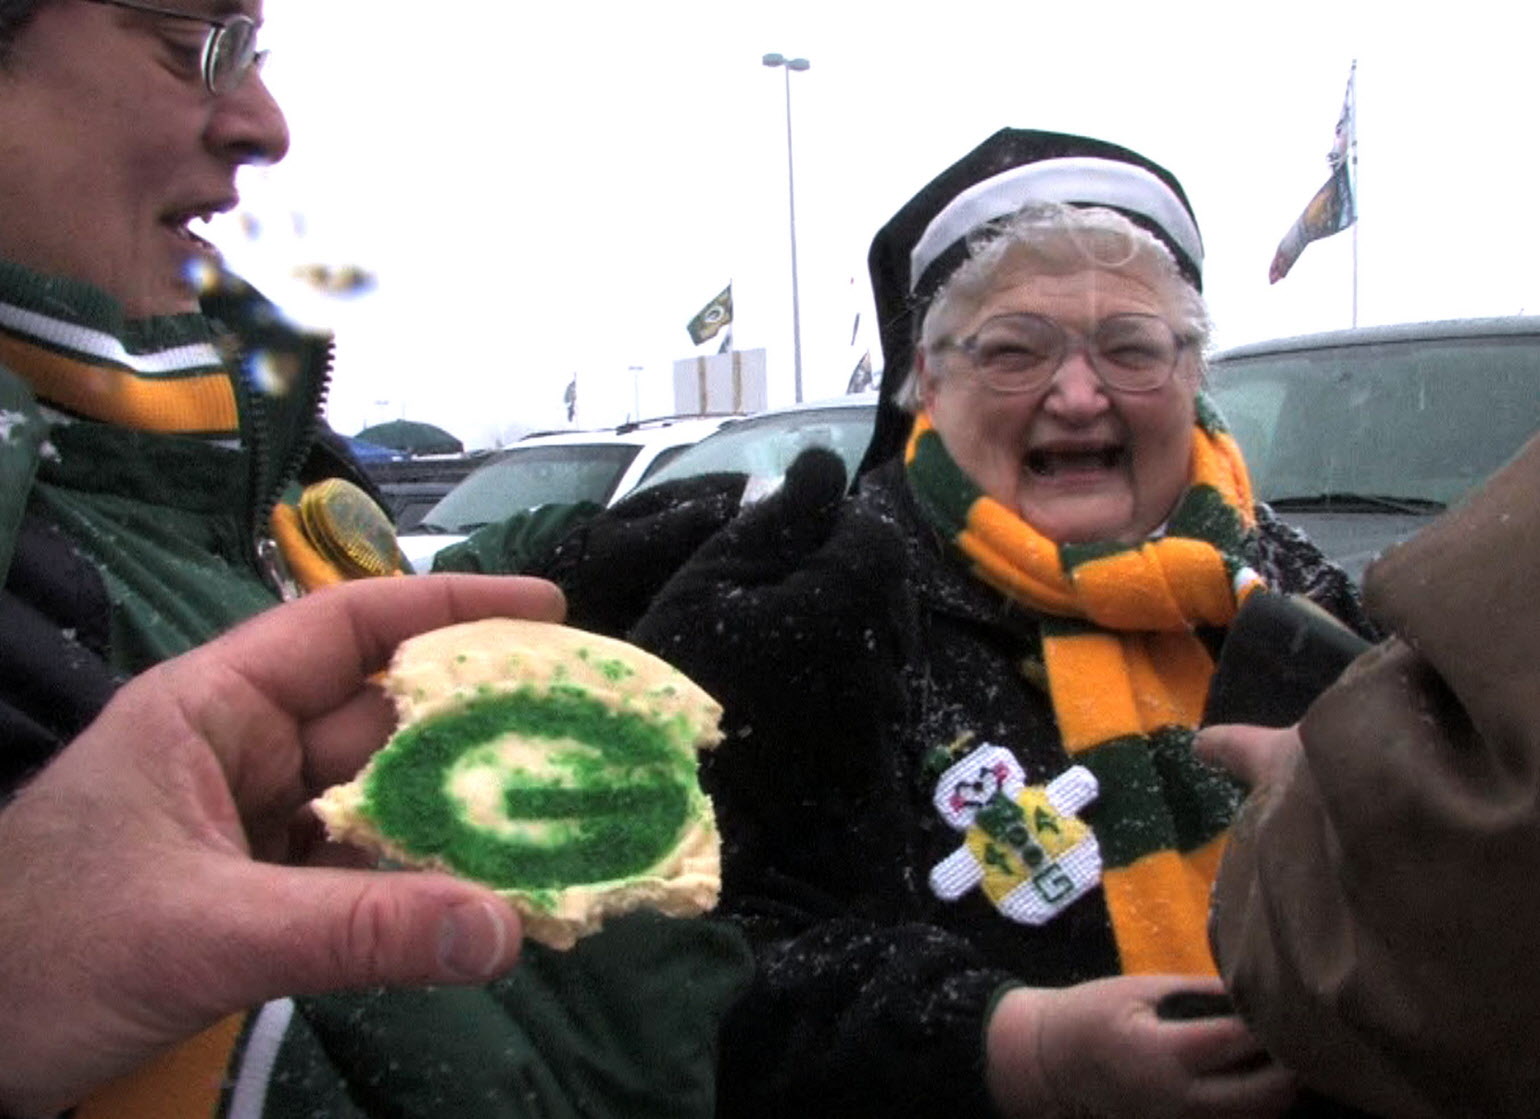 A cast of ever-loyal Packers fans braved the 0-degree temperatures to root on their team at Lambeau Field, as the Packers and Giants faced off for the NFC title. 